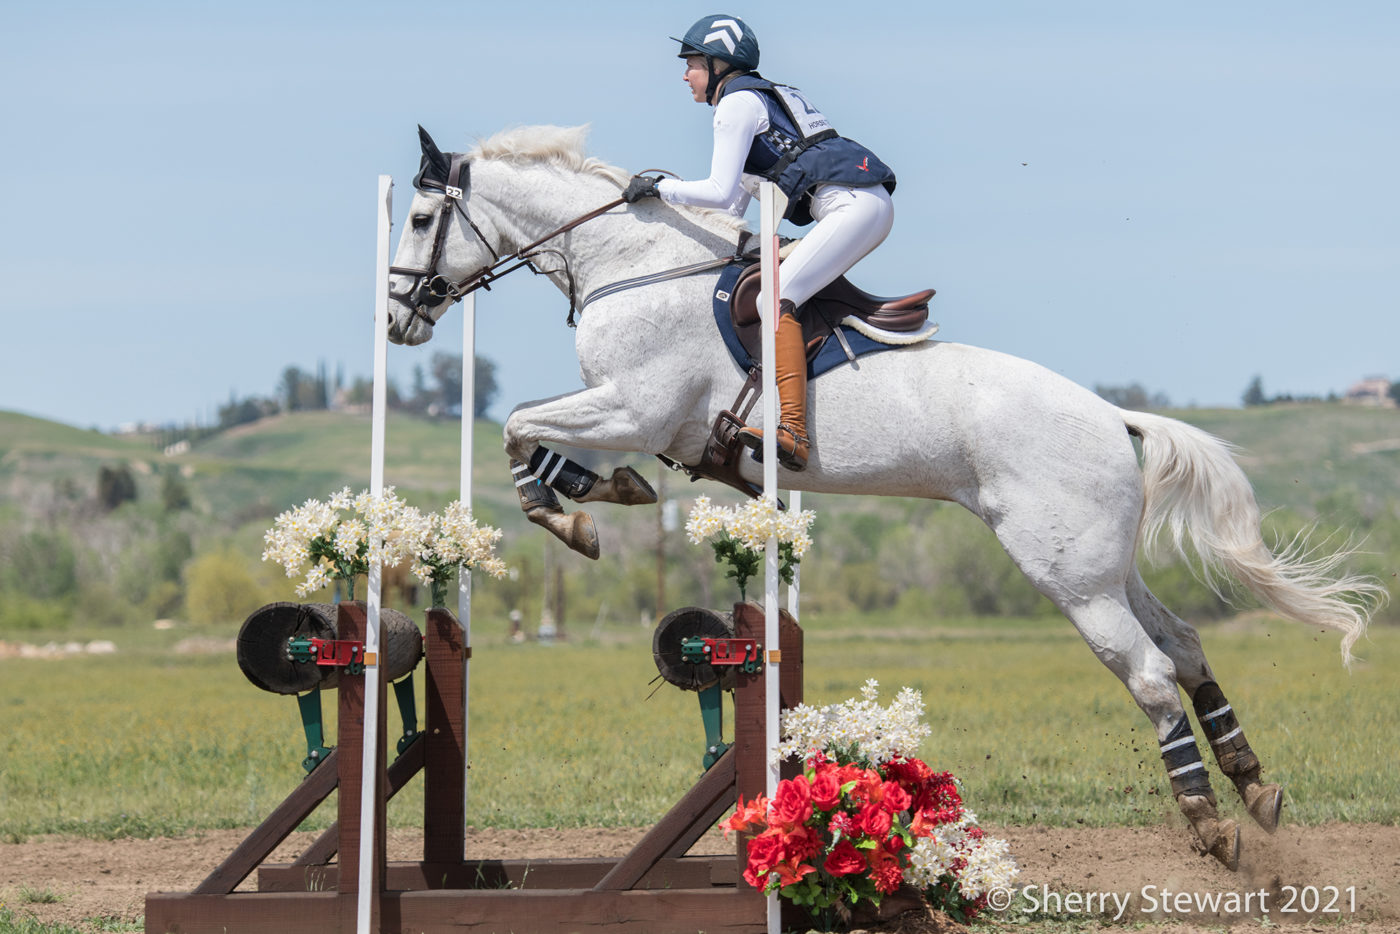 CCI3*-S - 2nd - Kelsey Holmes and NZB The Chosen One. Sherry Stewart Photo.